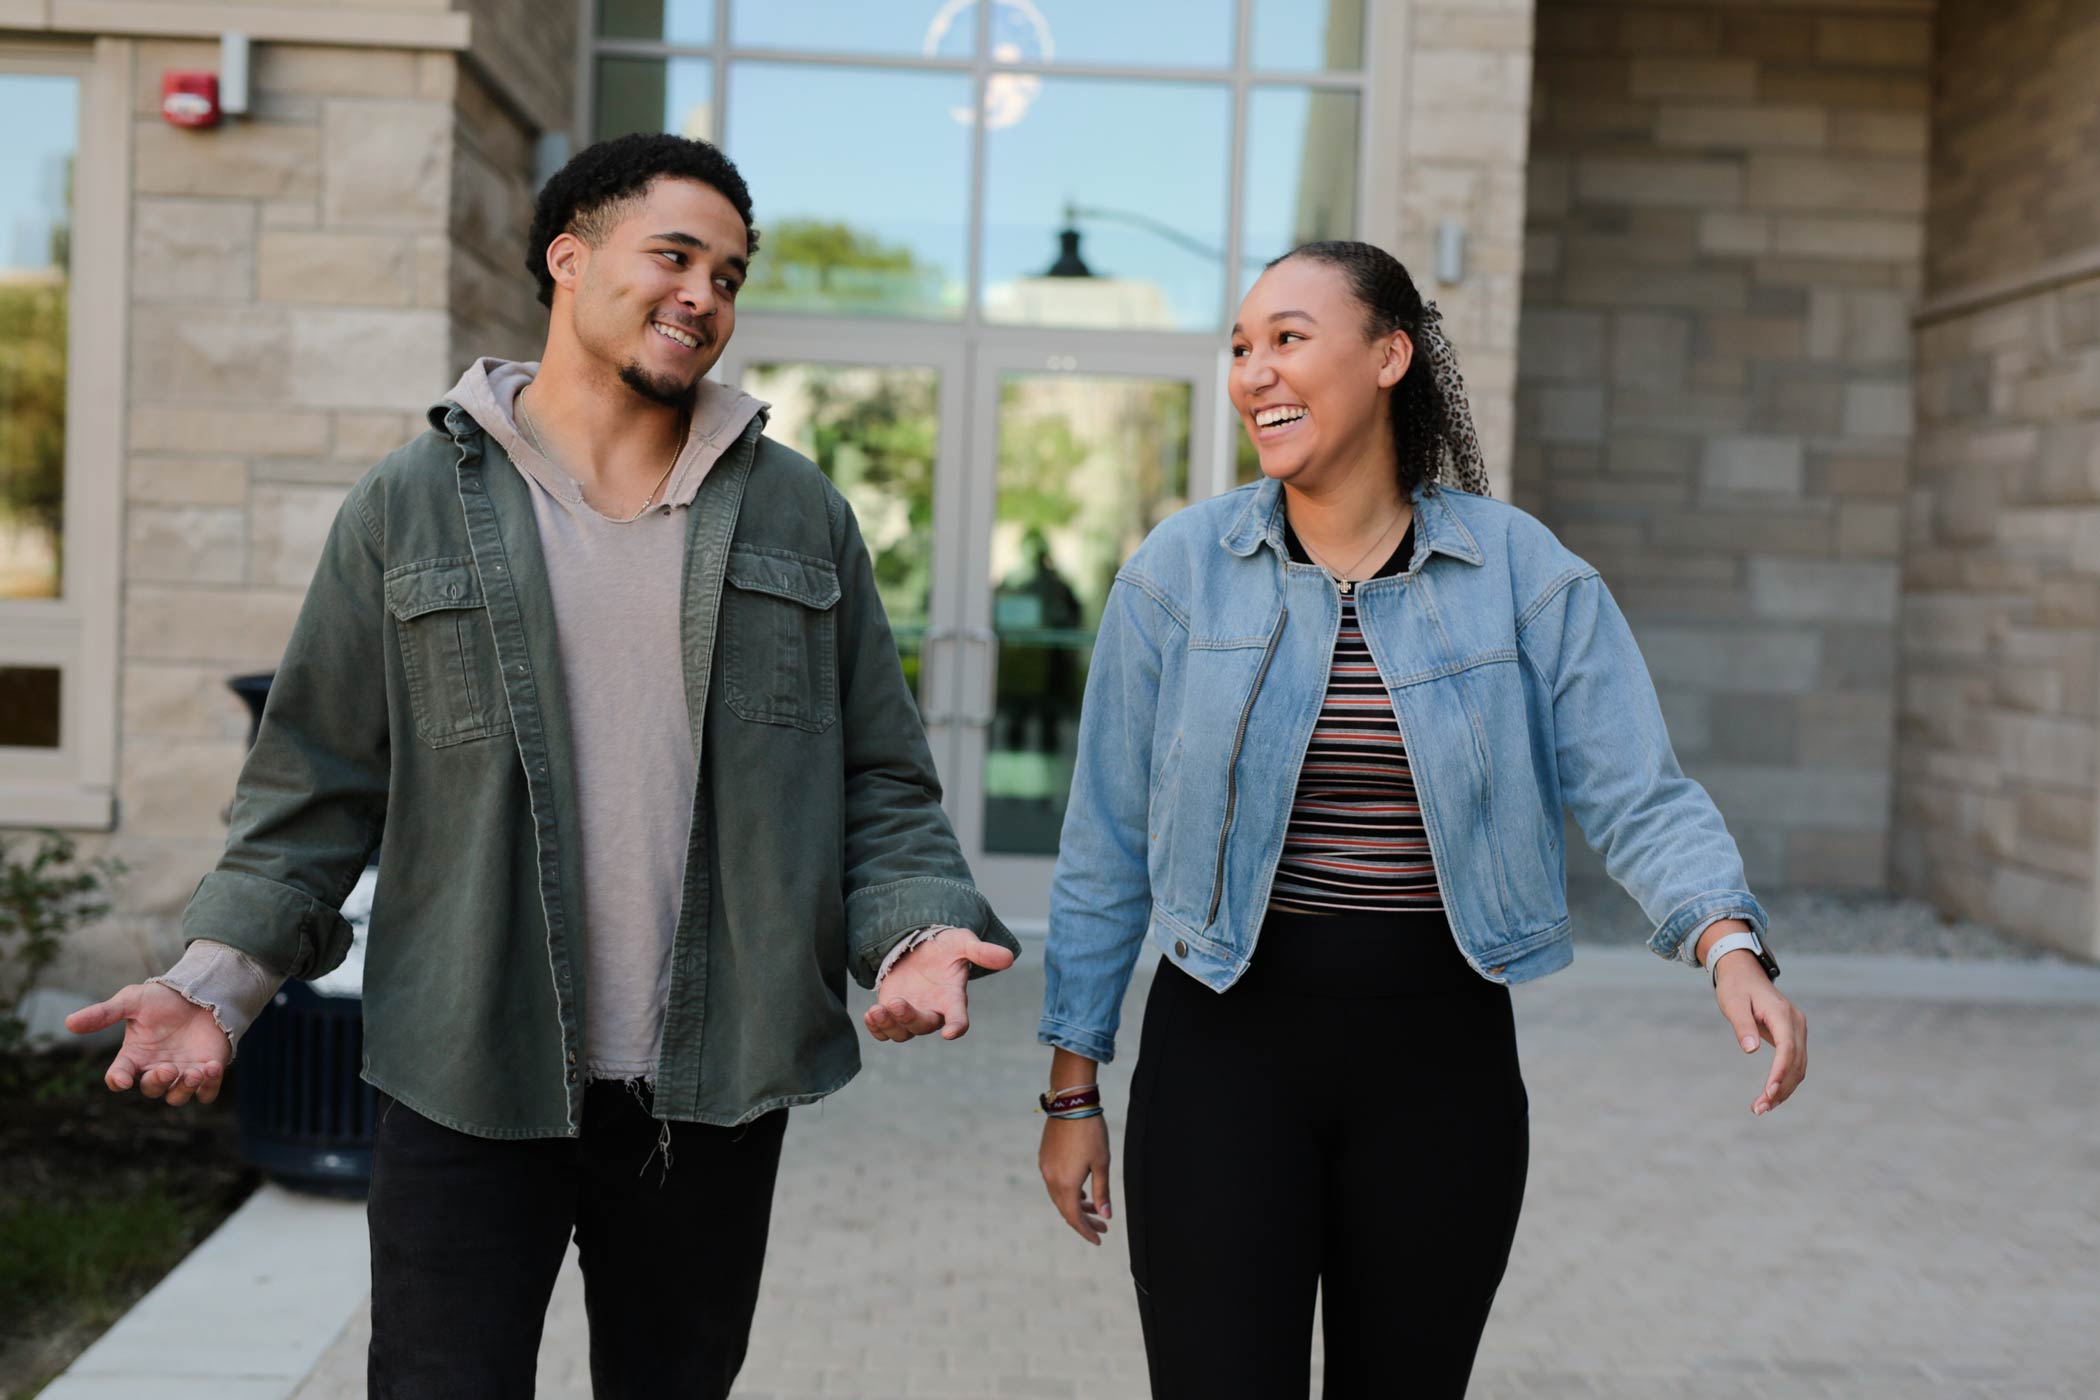 Two students smile at each other while they walk through campus